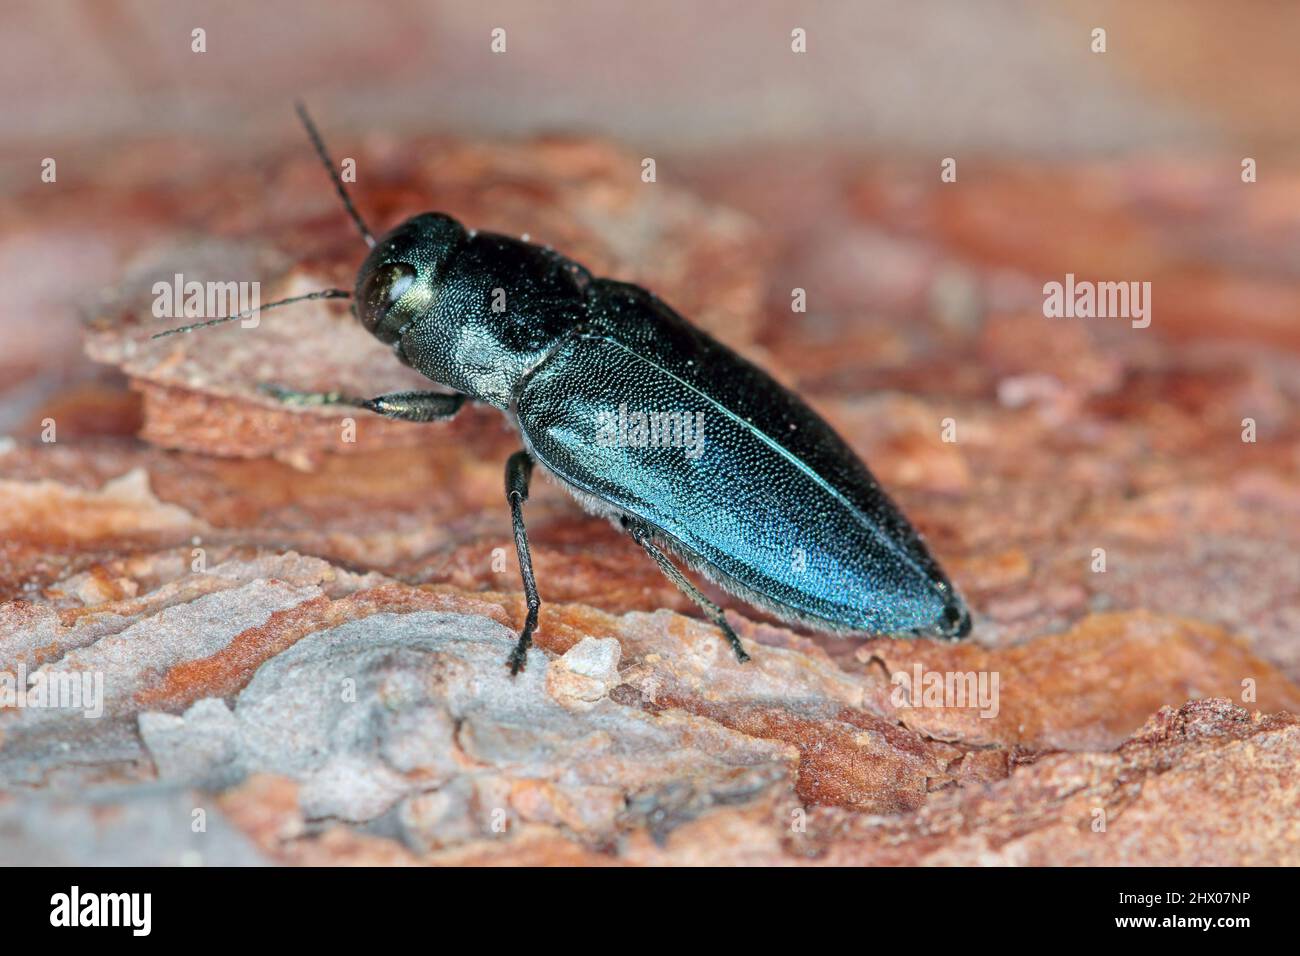 Steelblue jewel beetle Phaenops cyanea on pine bark. It is a pest of pines from the family Buprestidae known as jewel beetles or metallic wood-boring Stock Photo